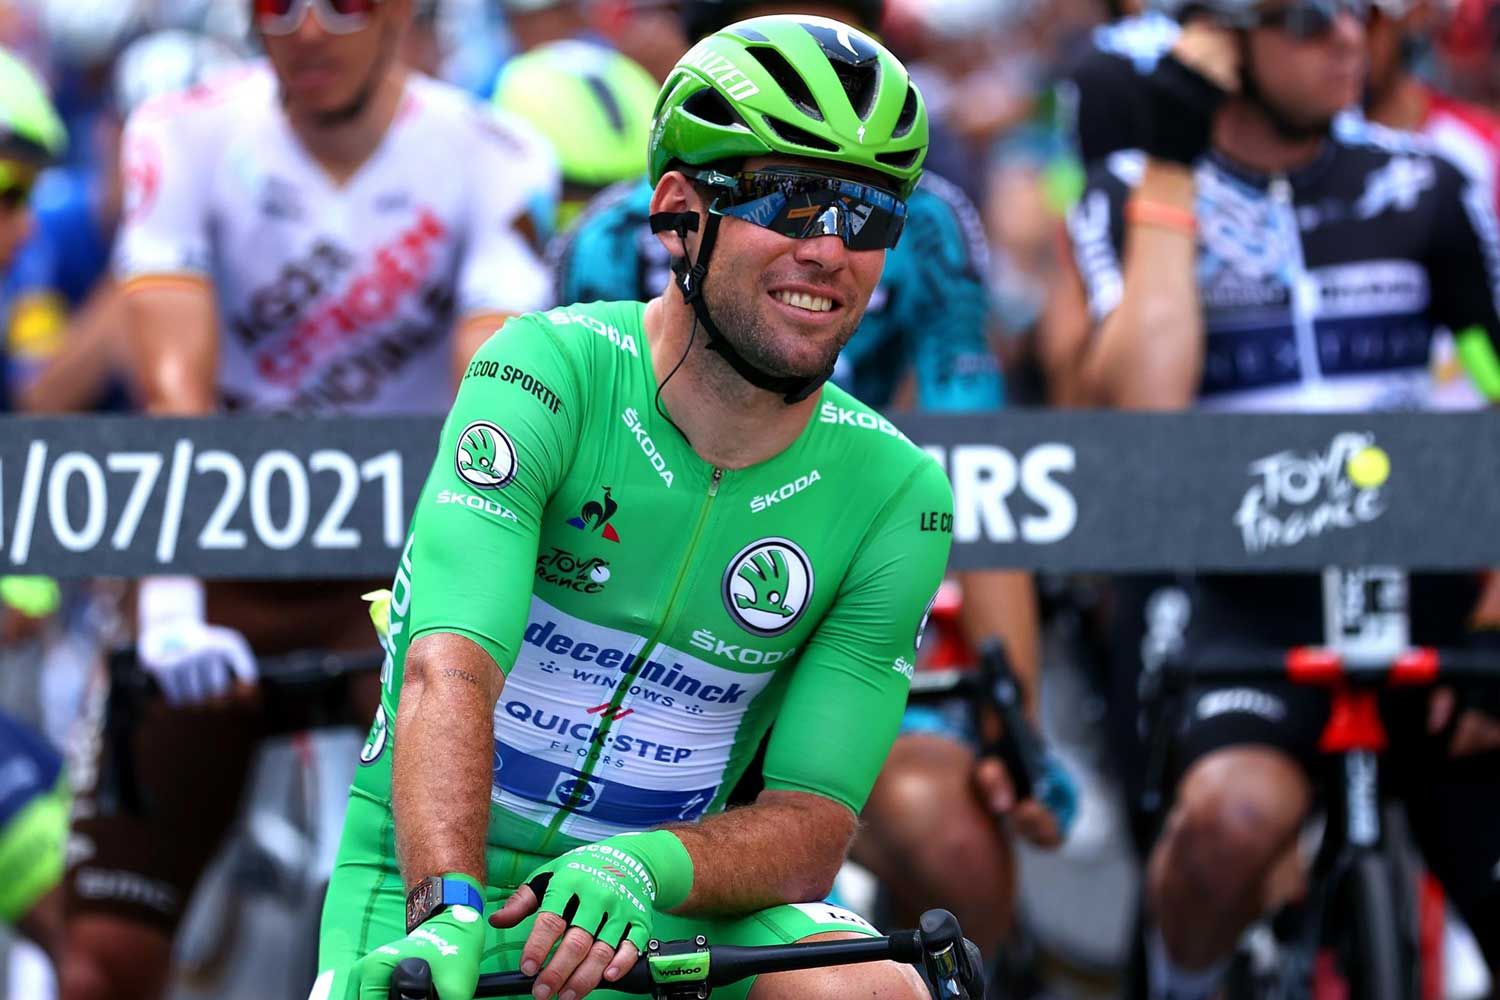 British cyclist, Mark Cavendish, who finished outside the time limit in his previous participation in 2018, crashed out in 2017, at the Tour de France 2021 with three stage victories to date and 33 career stage wins, swiftly chasing down Eddy Merckx's record of 34 (Image: eurosport.com)(